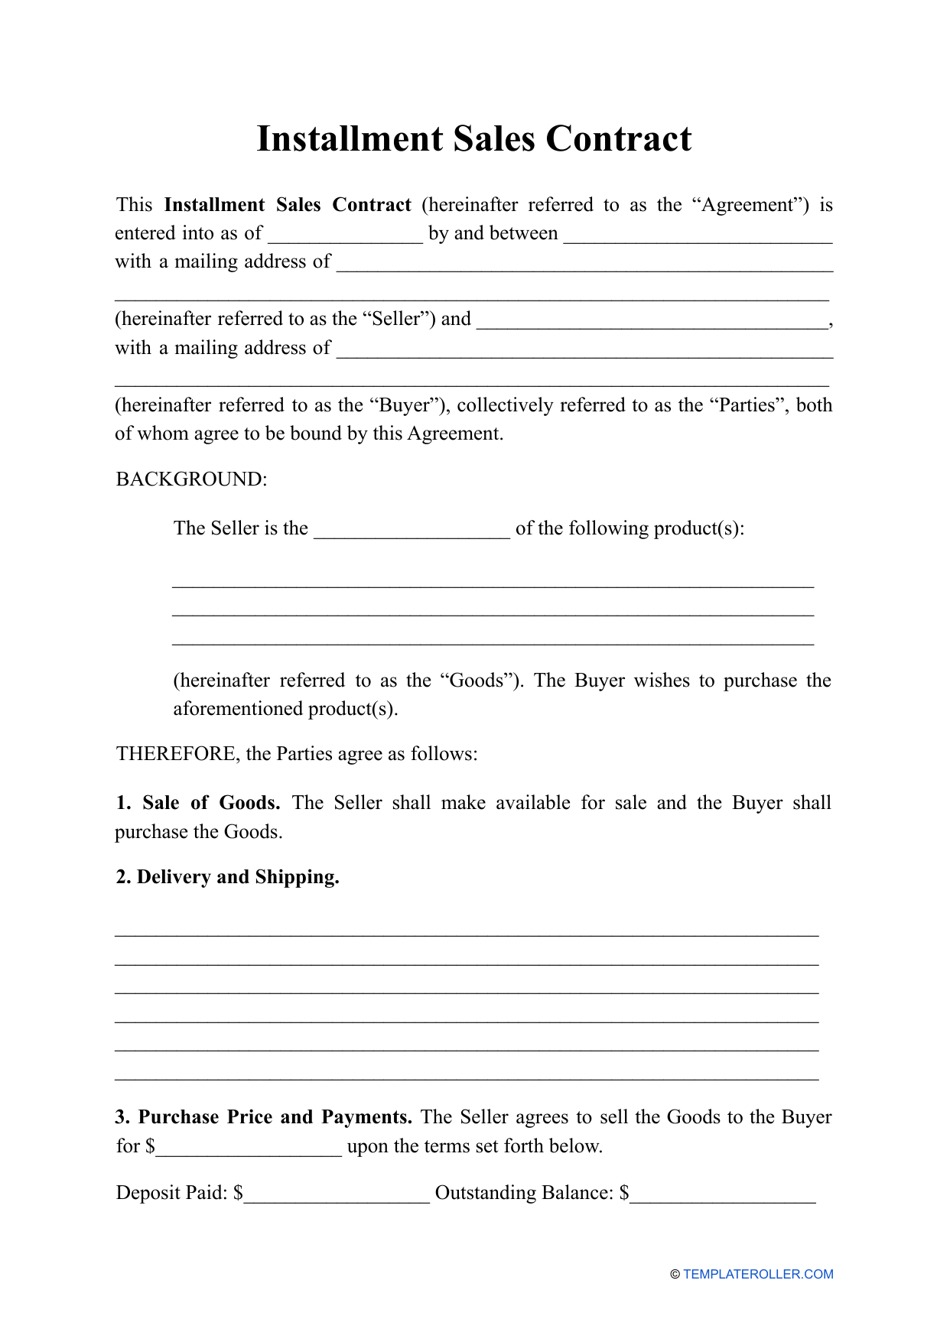 Installment Sales Contract Template, Page 1